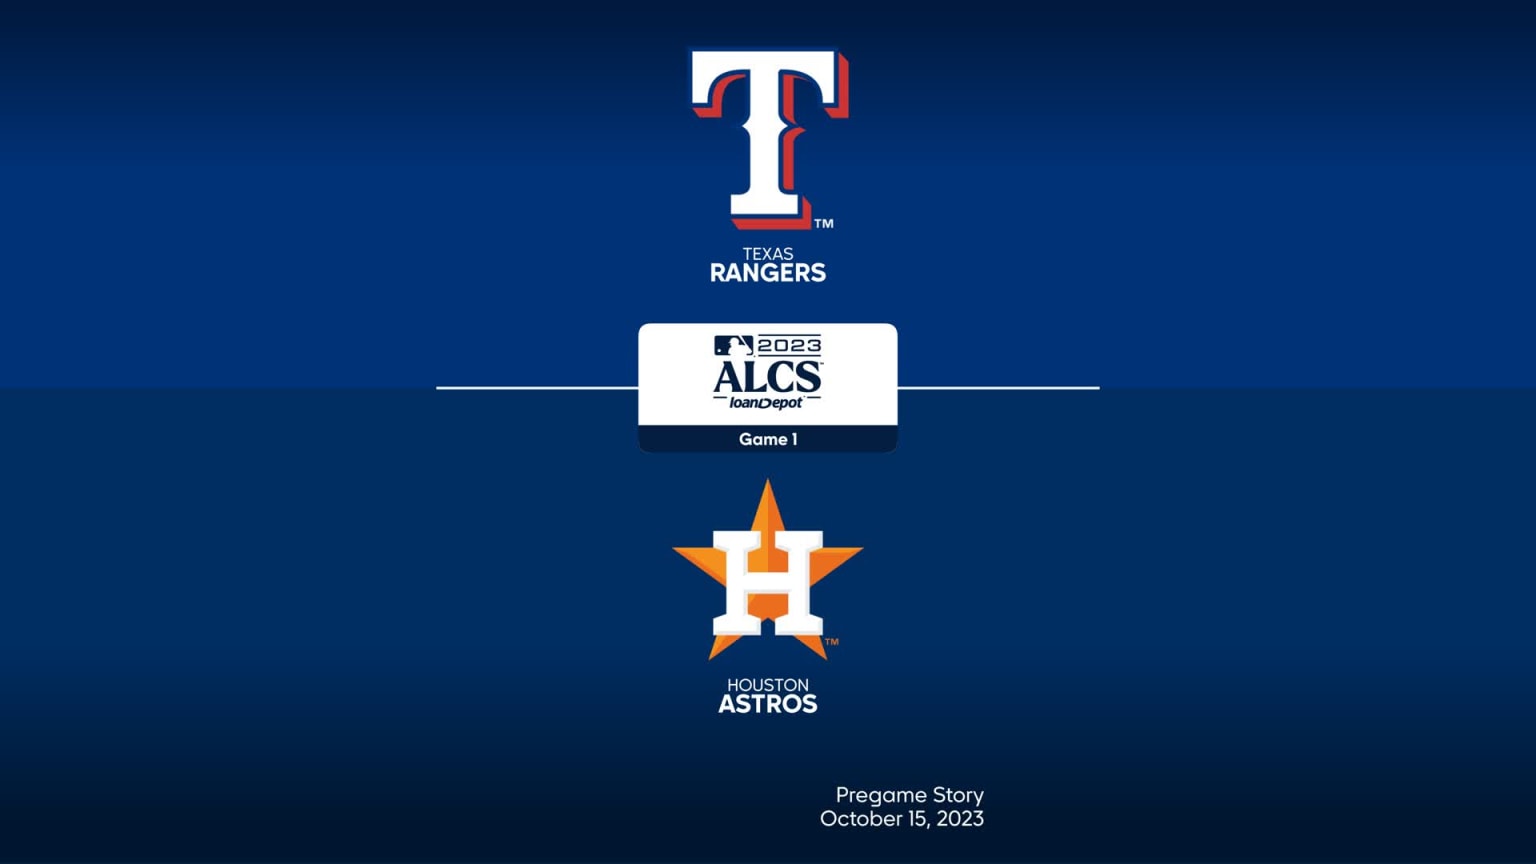 Rangers at Astros - October 15, 2023: Title Slate